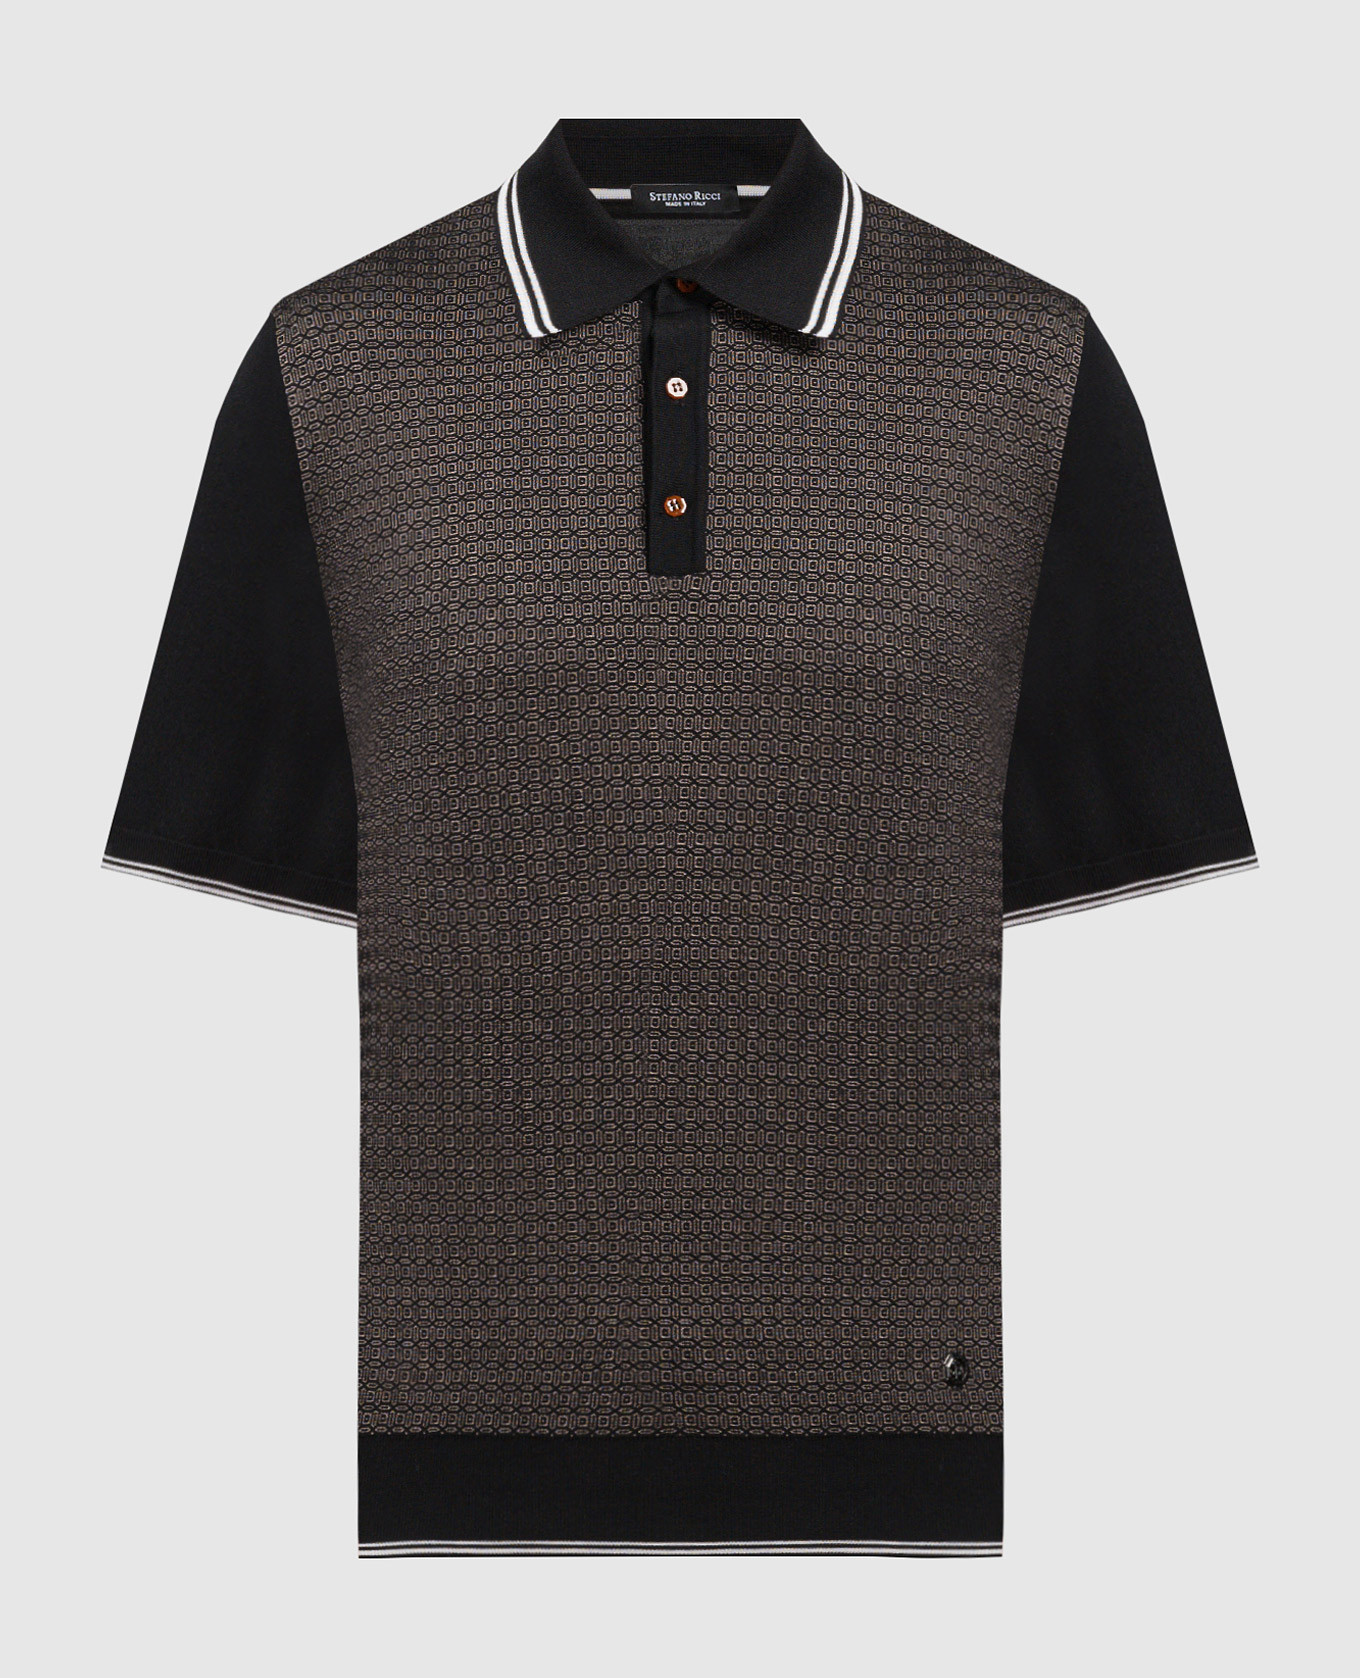 Black polo shirt with patterned silk